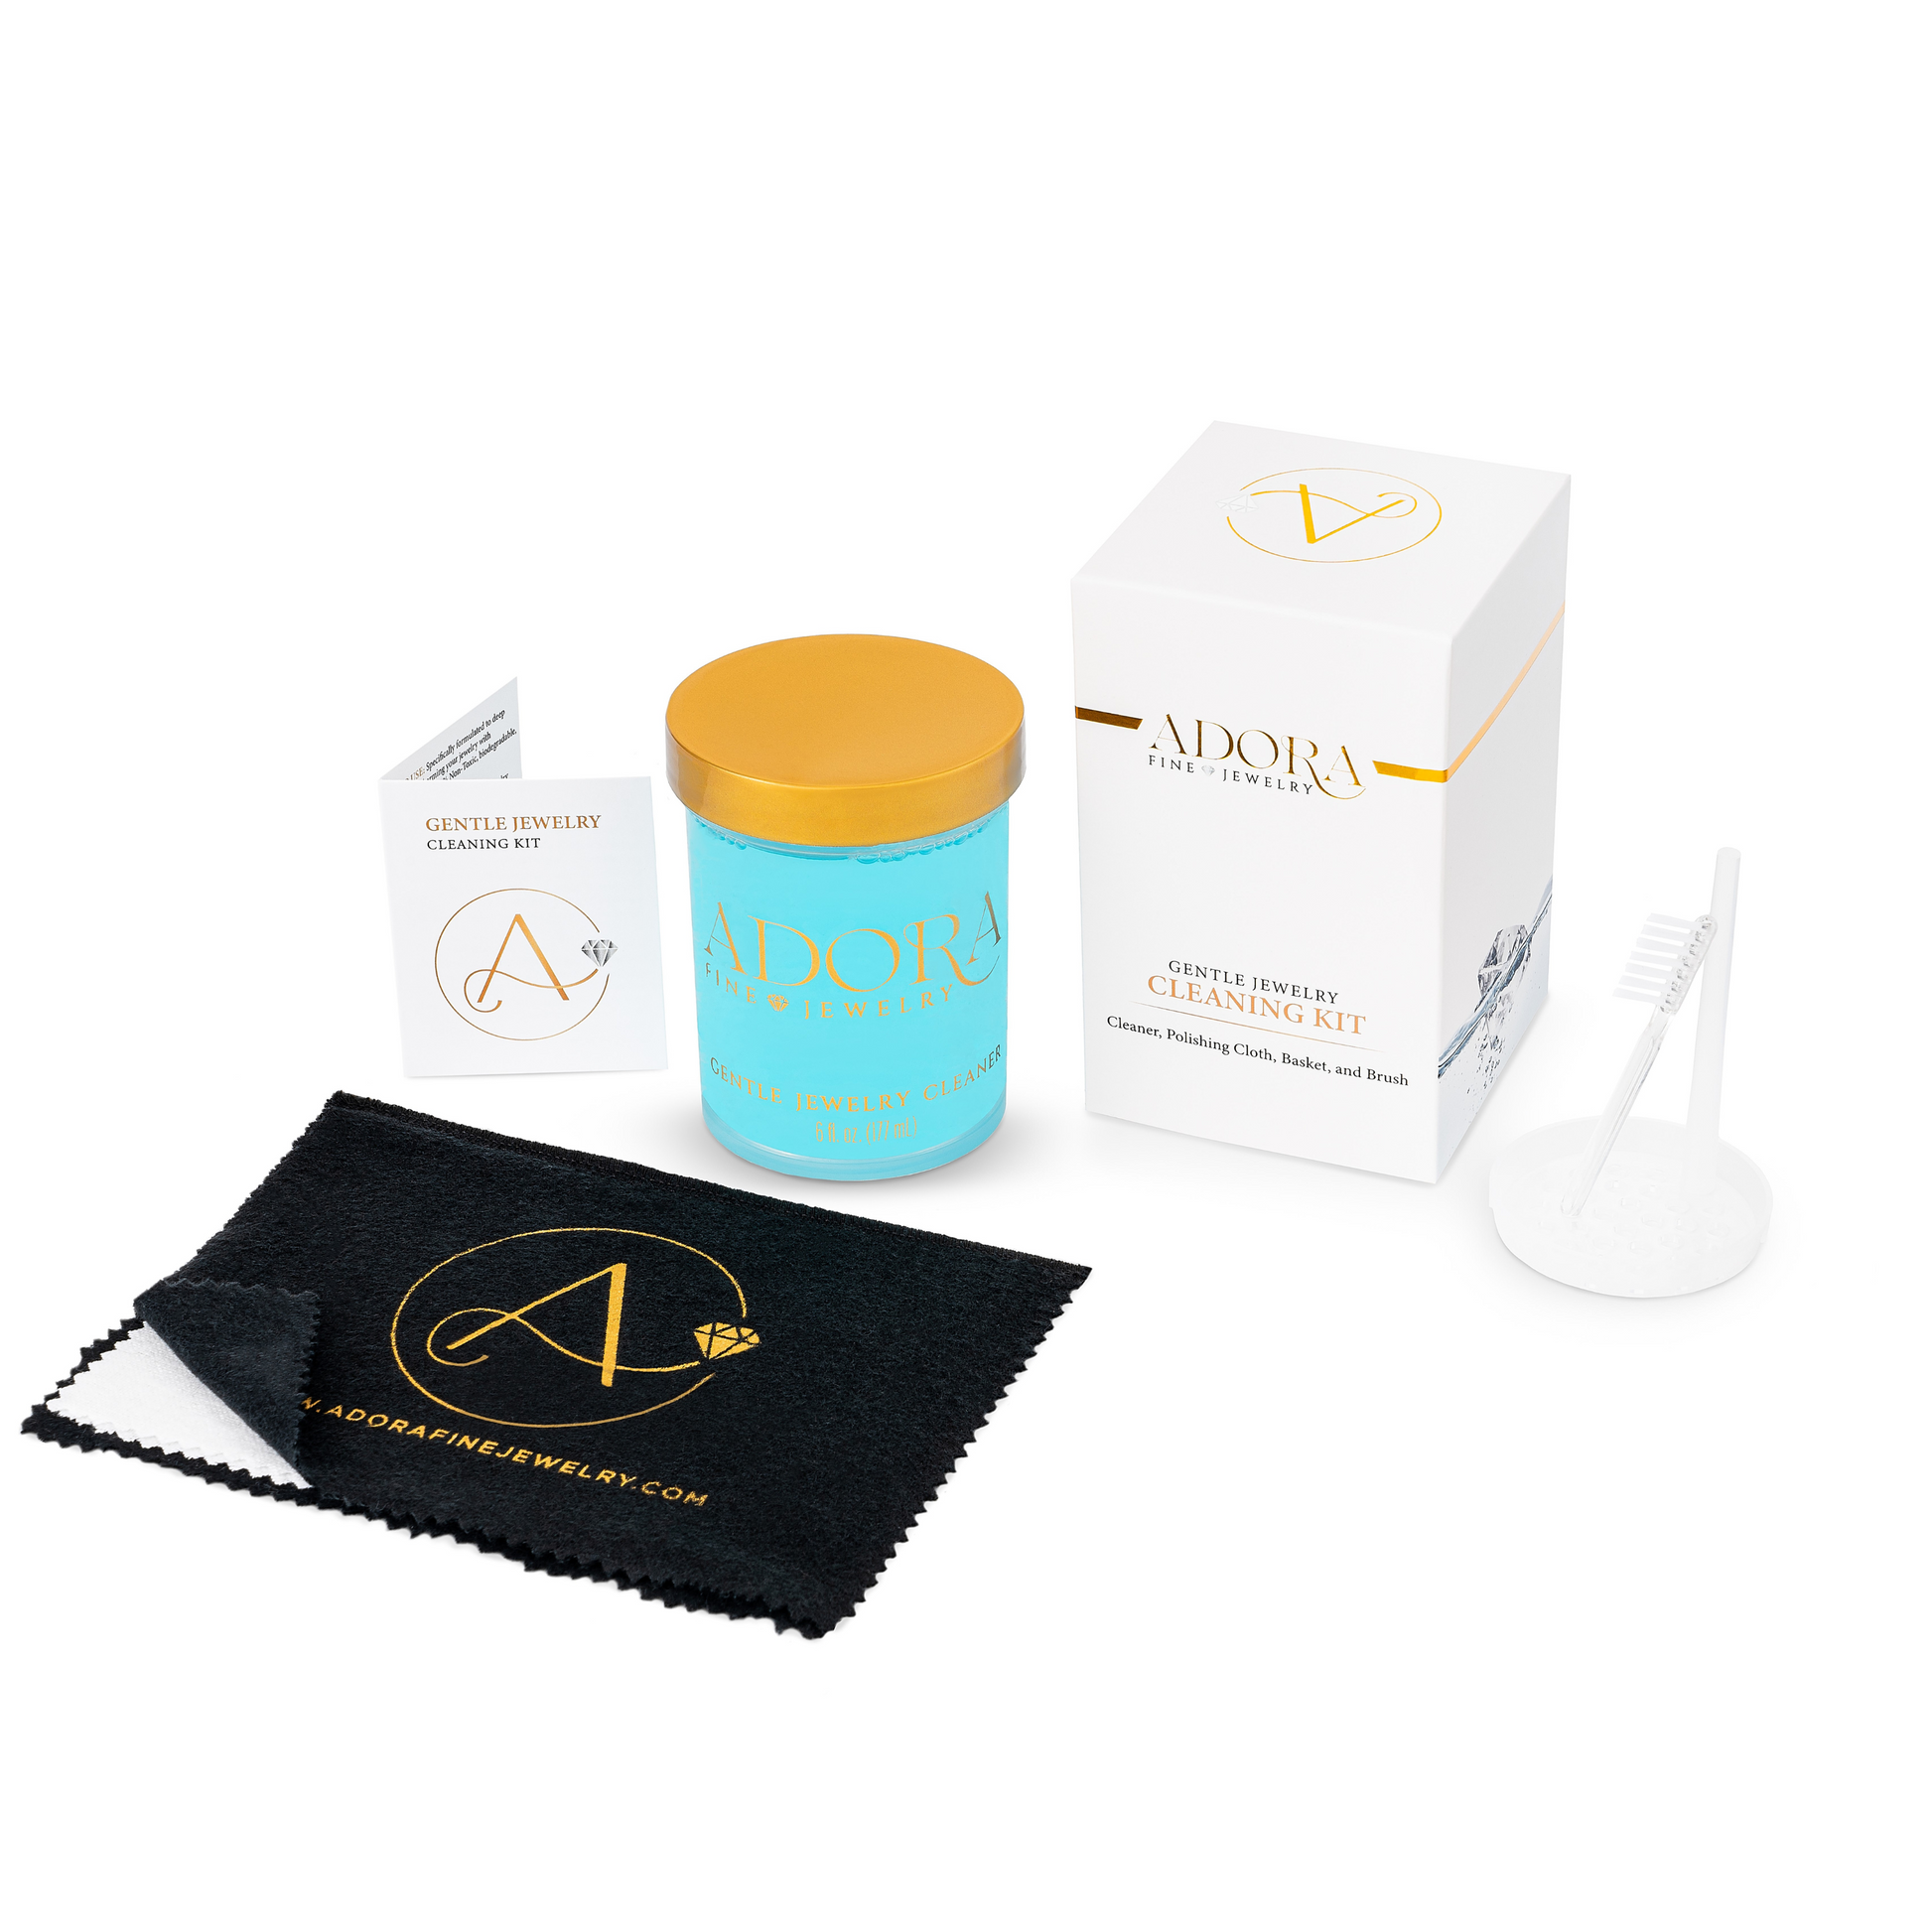 Gentle Jewelry Cleaning Solution Kit - Adora Fine Jewelry